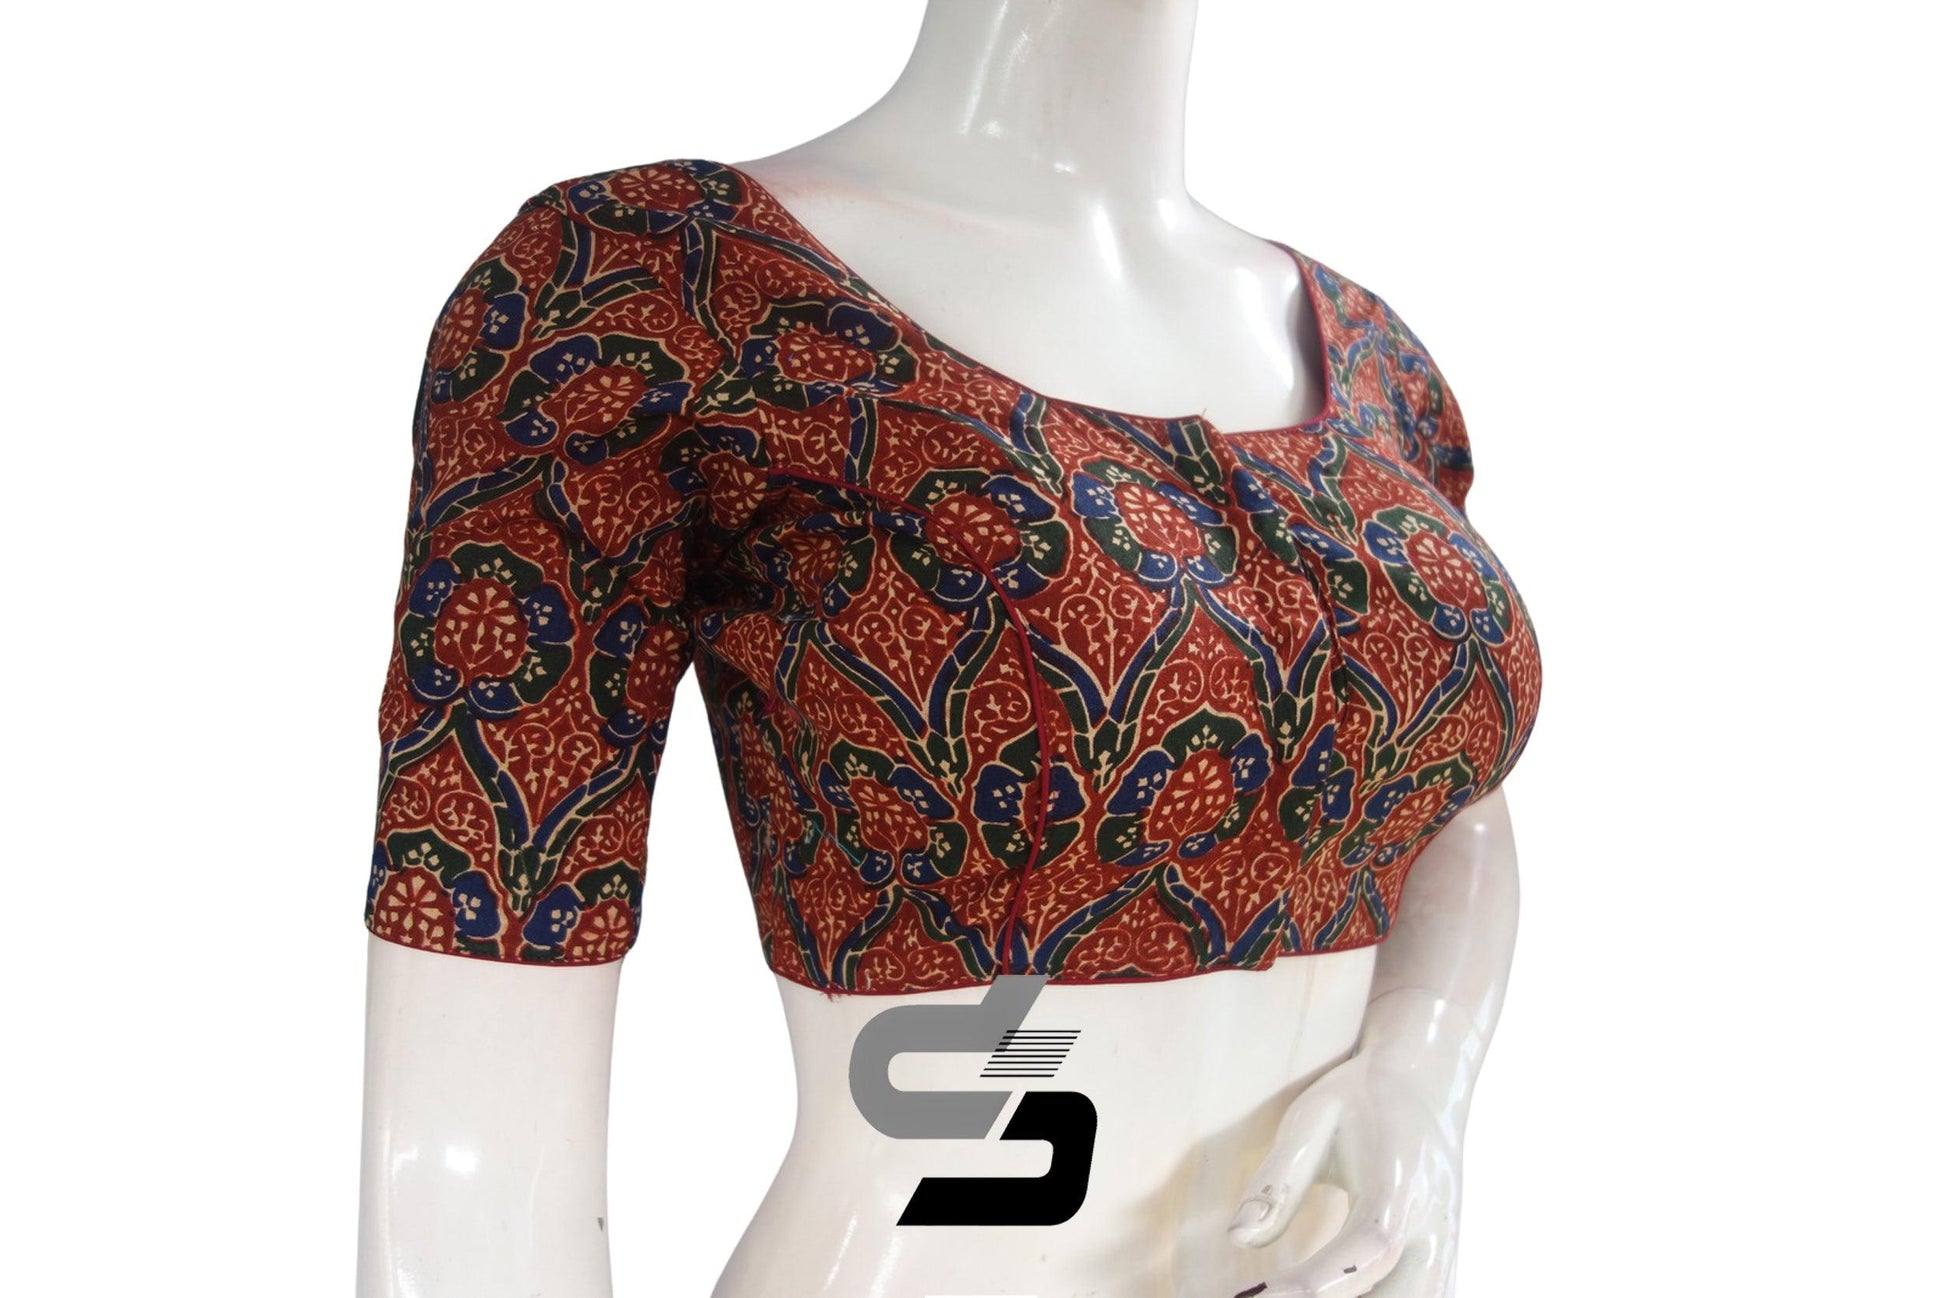 Maroon Color Cotton Printed Readymade Saree Blouse - D3blouses